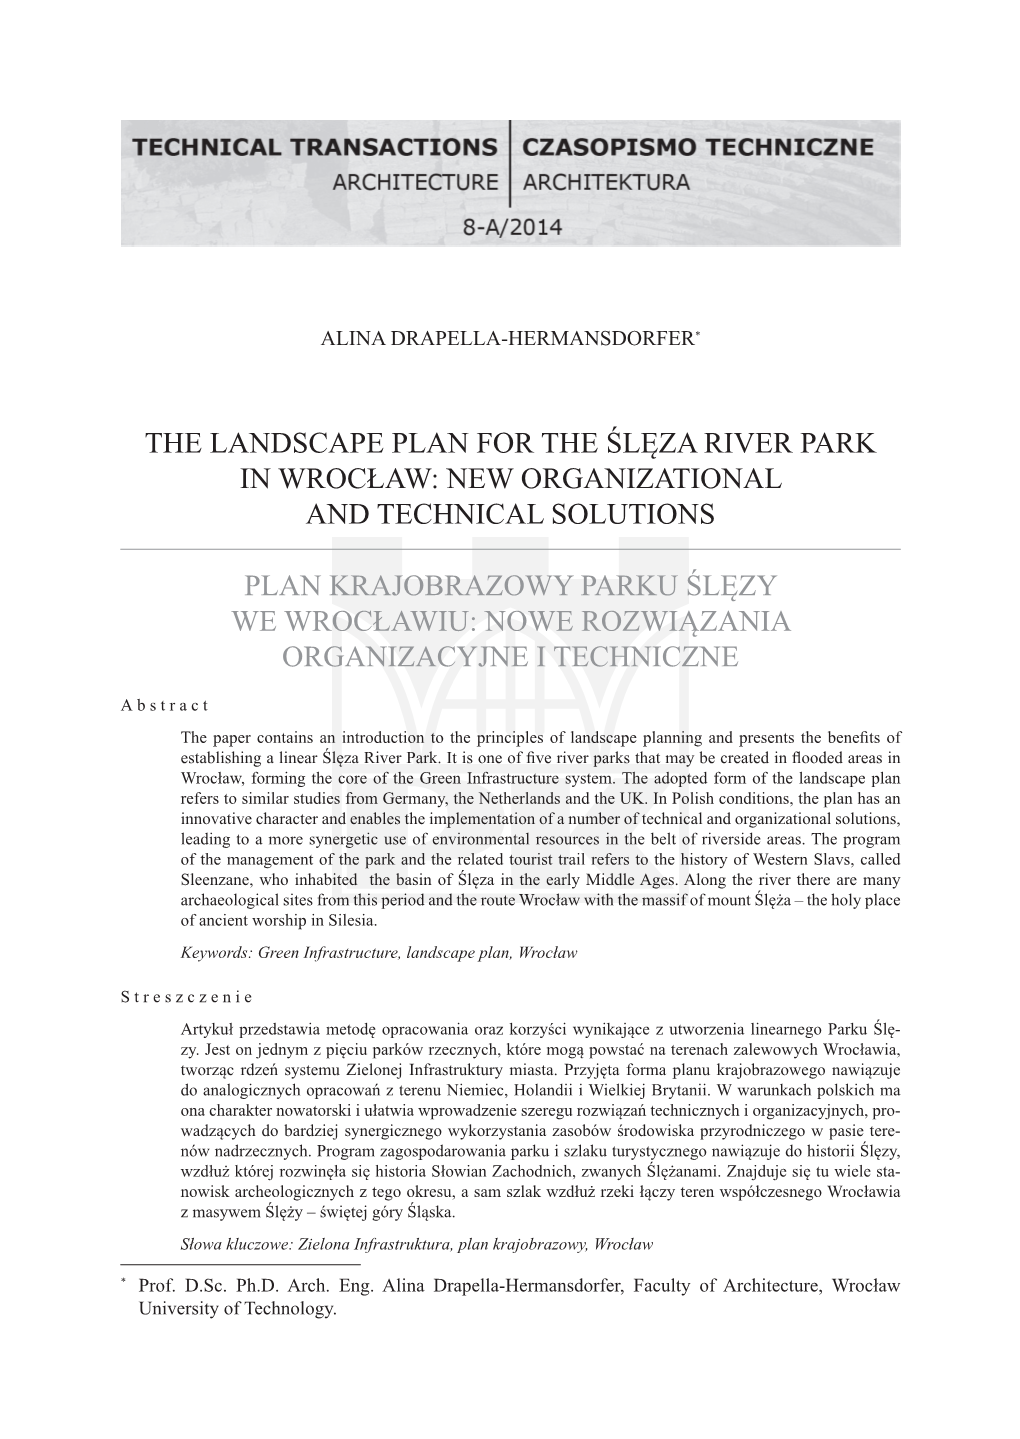 The Landscape Plan for the Ślęza River Park in Wrocław: New Organizational and Technical Solutions